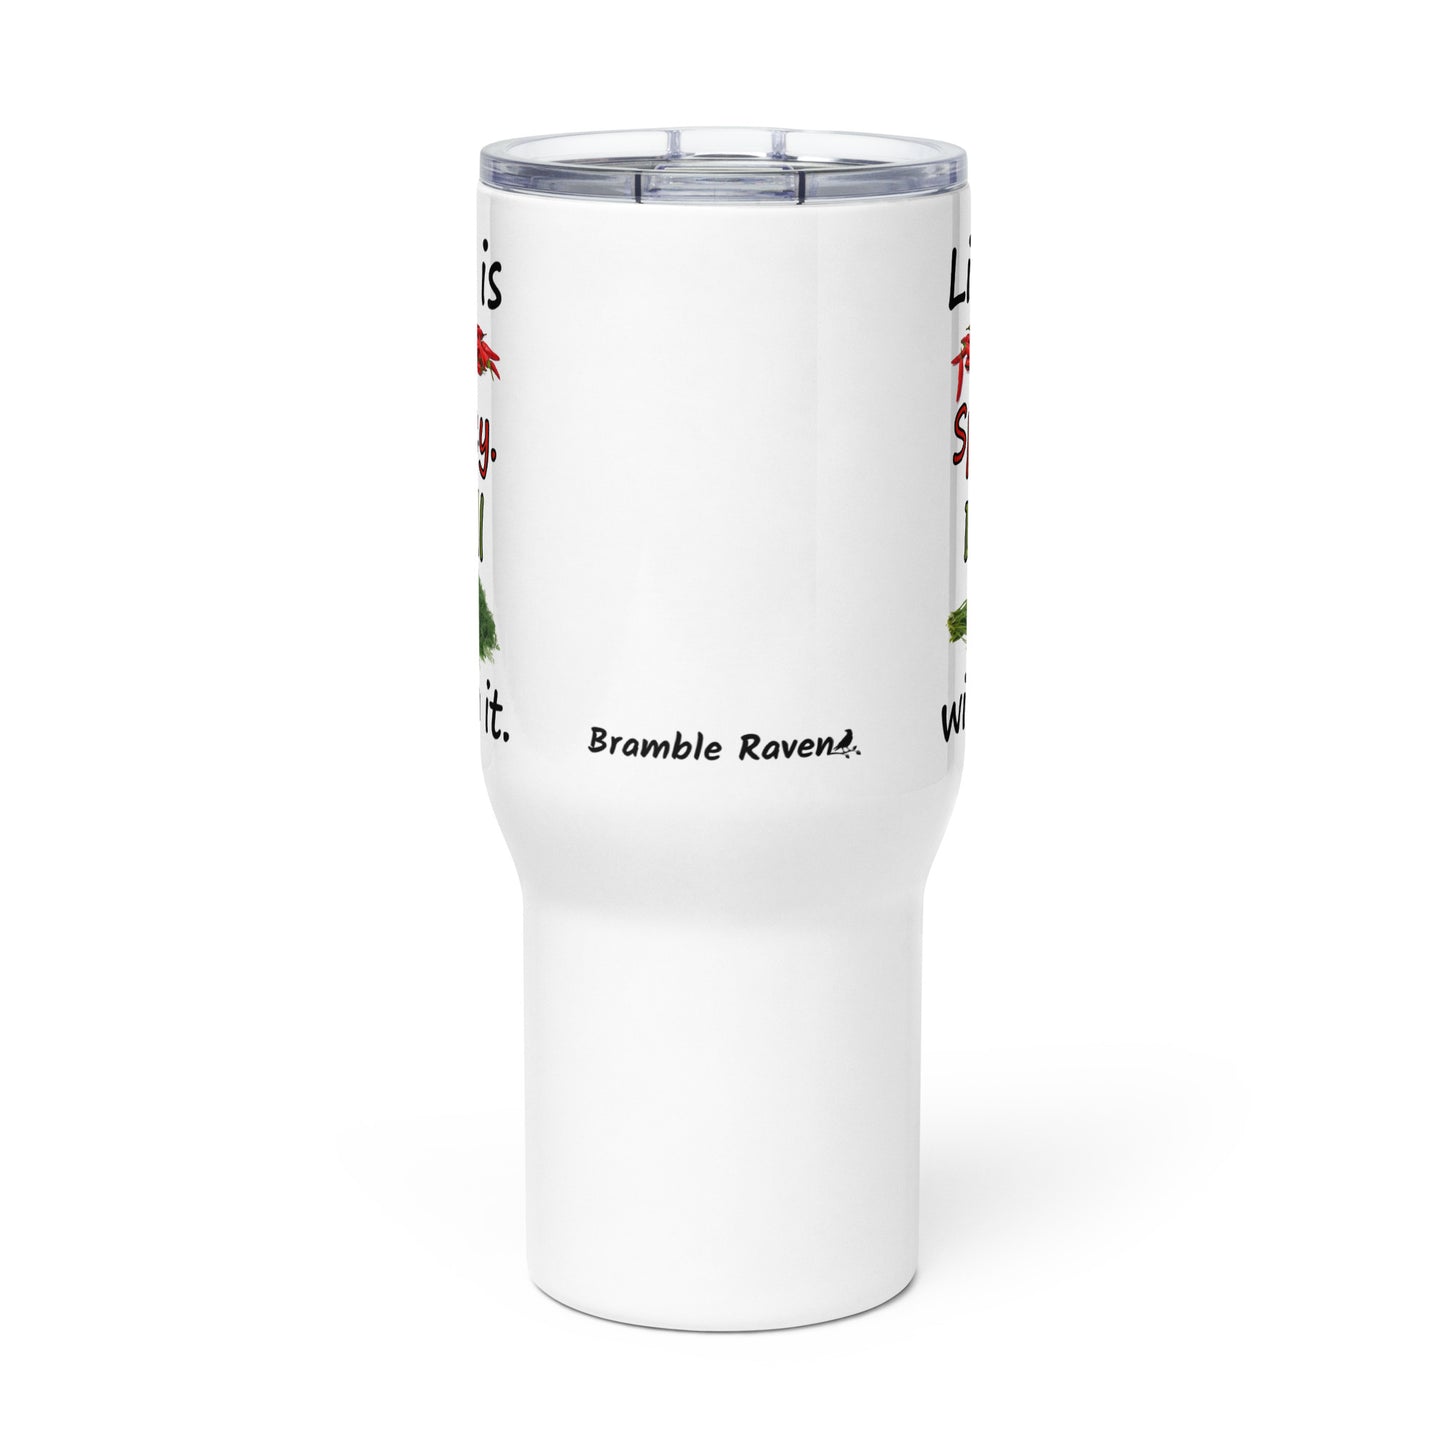 Stainless steel travel mug with handle. Holds 25 ounces of hot or cold liquids. Fits most car cup holders. Features double-sided phrase: Life is spicy. Dill with it, and accompanying chili pepper and dill weed images. Comes with spill proof plastic lid. Front view.